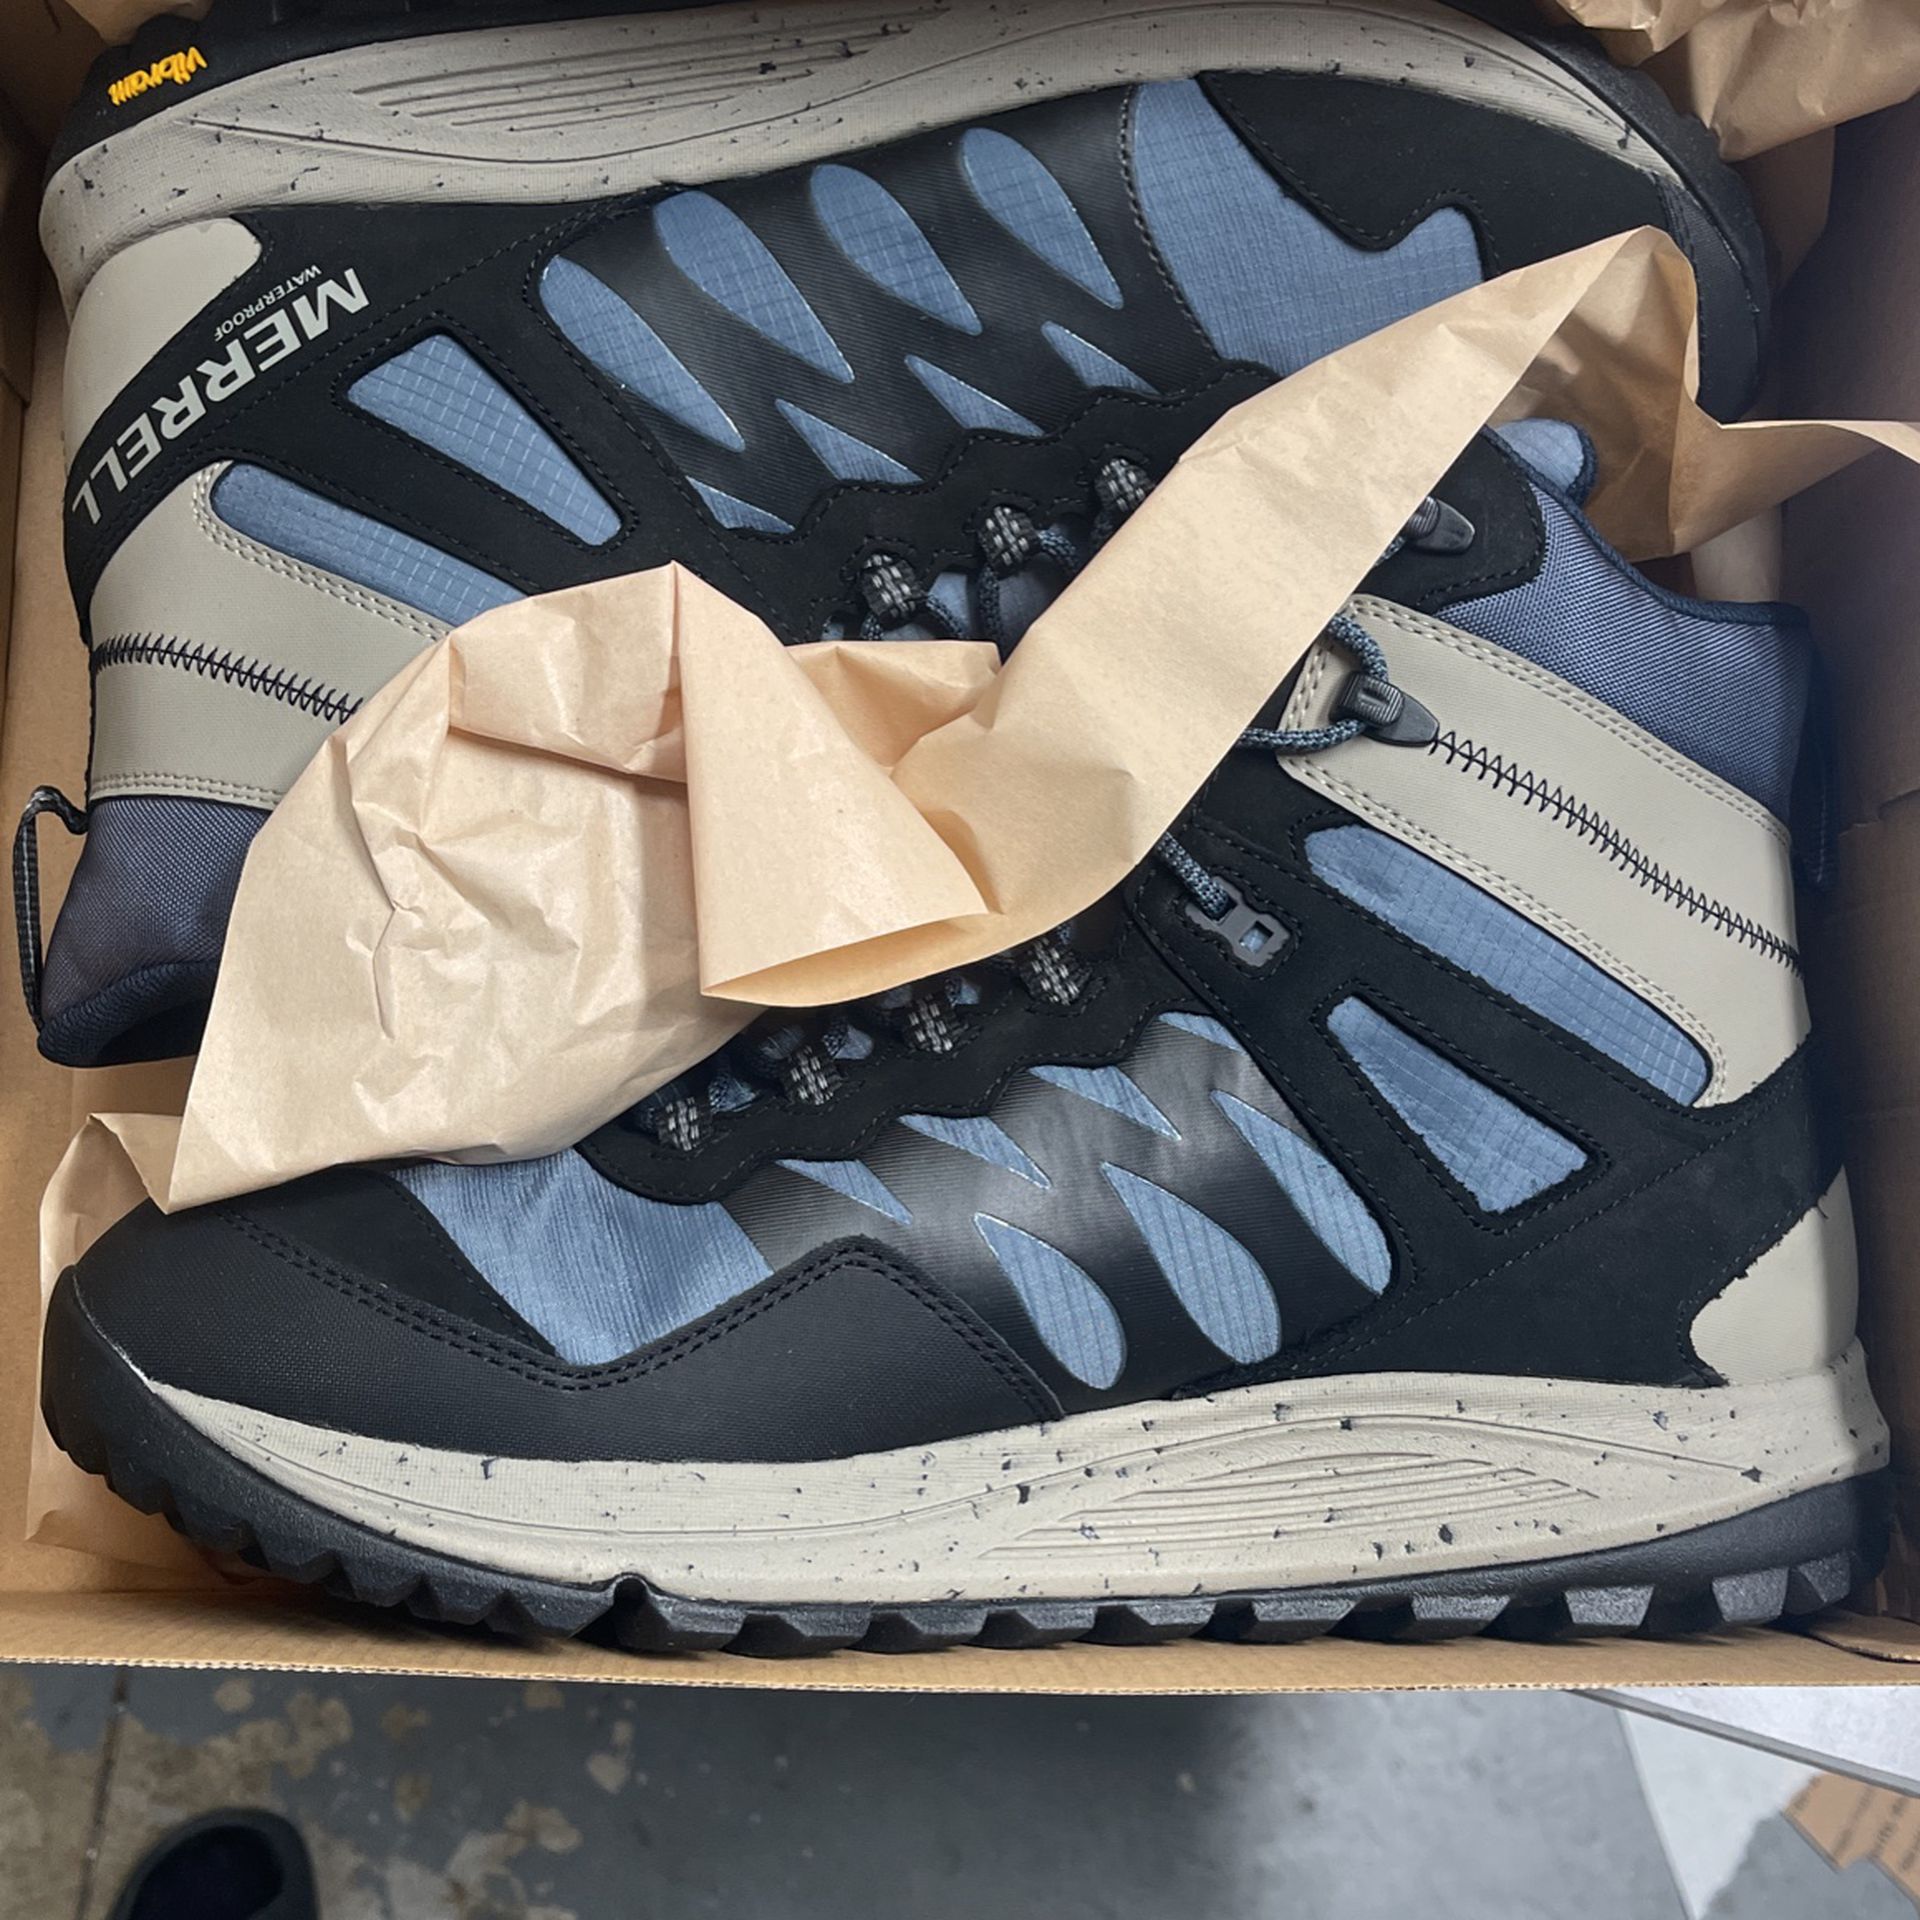 Men Hiking Boots Size 13 for Sale in Menifee, CA - OfferUp